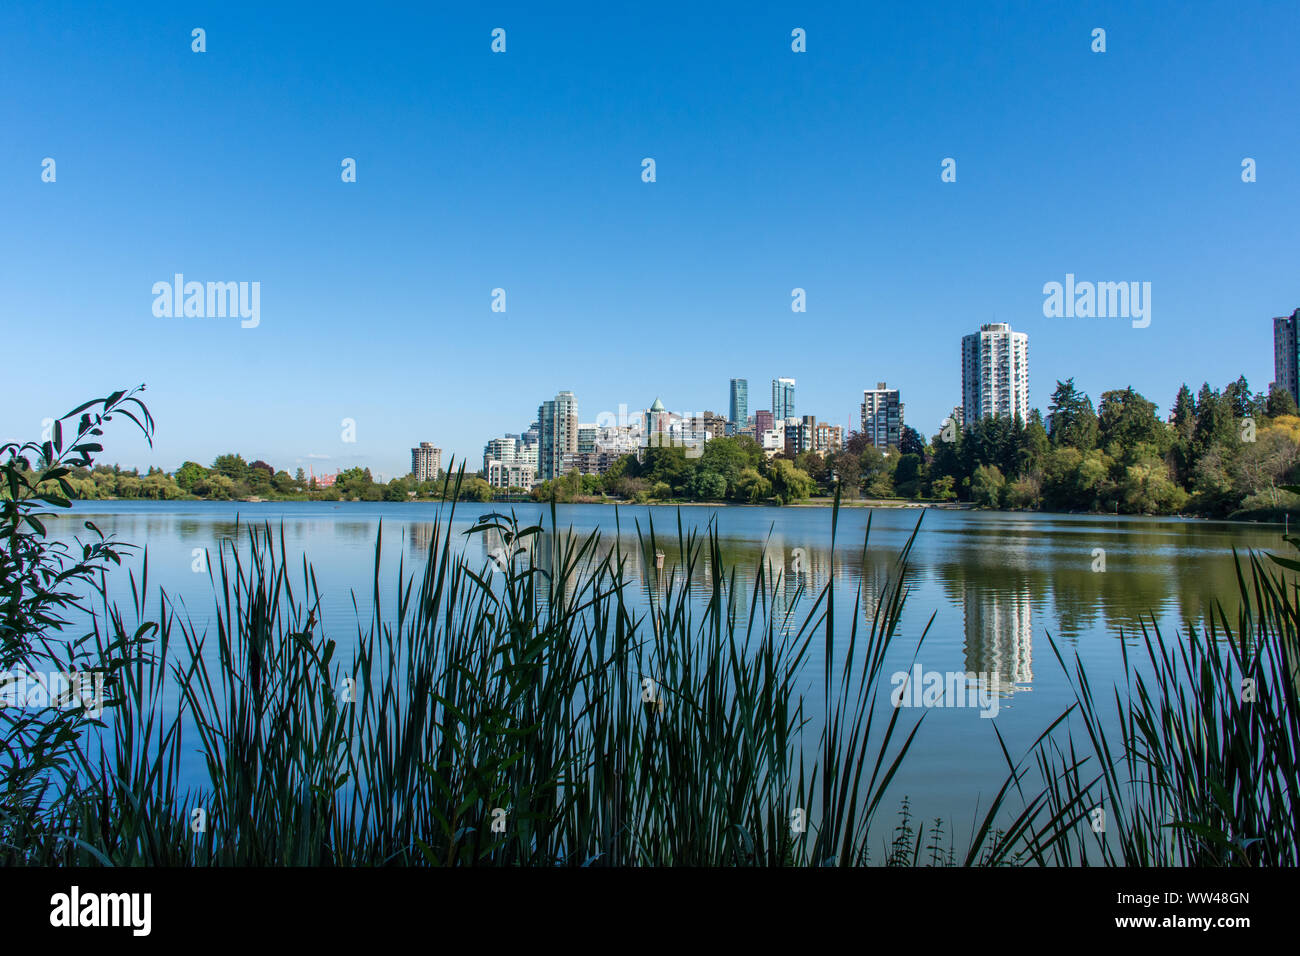 Lost Lagoon in Stanley Park in Vancouver, British Columbia, Canada looking towards downtown urban apartments near the beautiful summer nature. Stock Photo